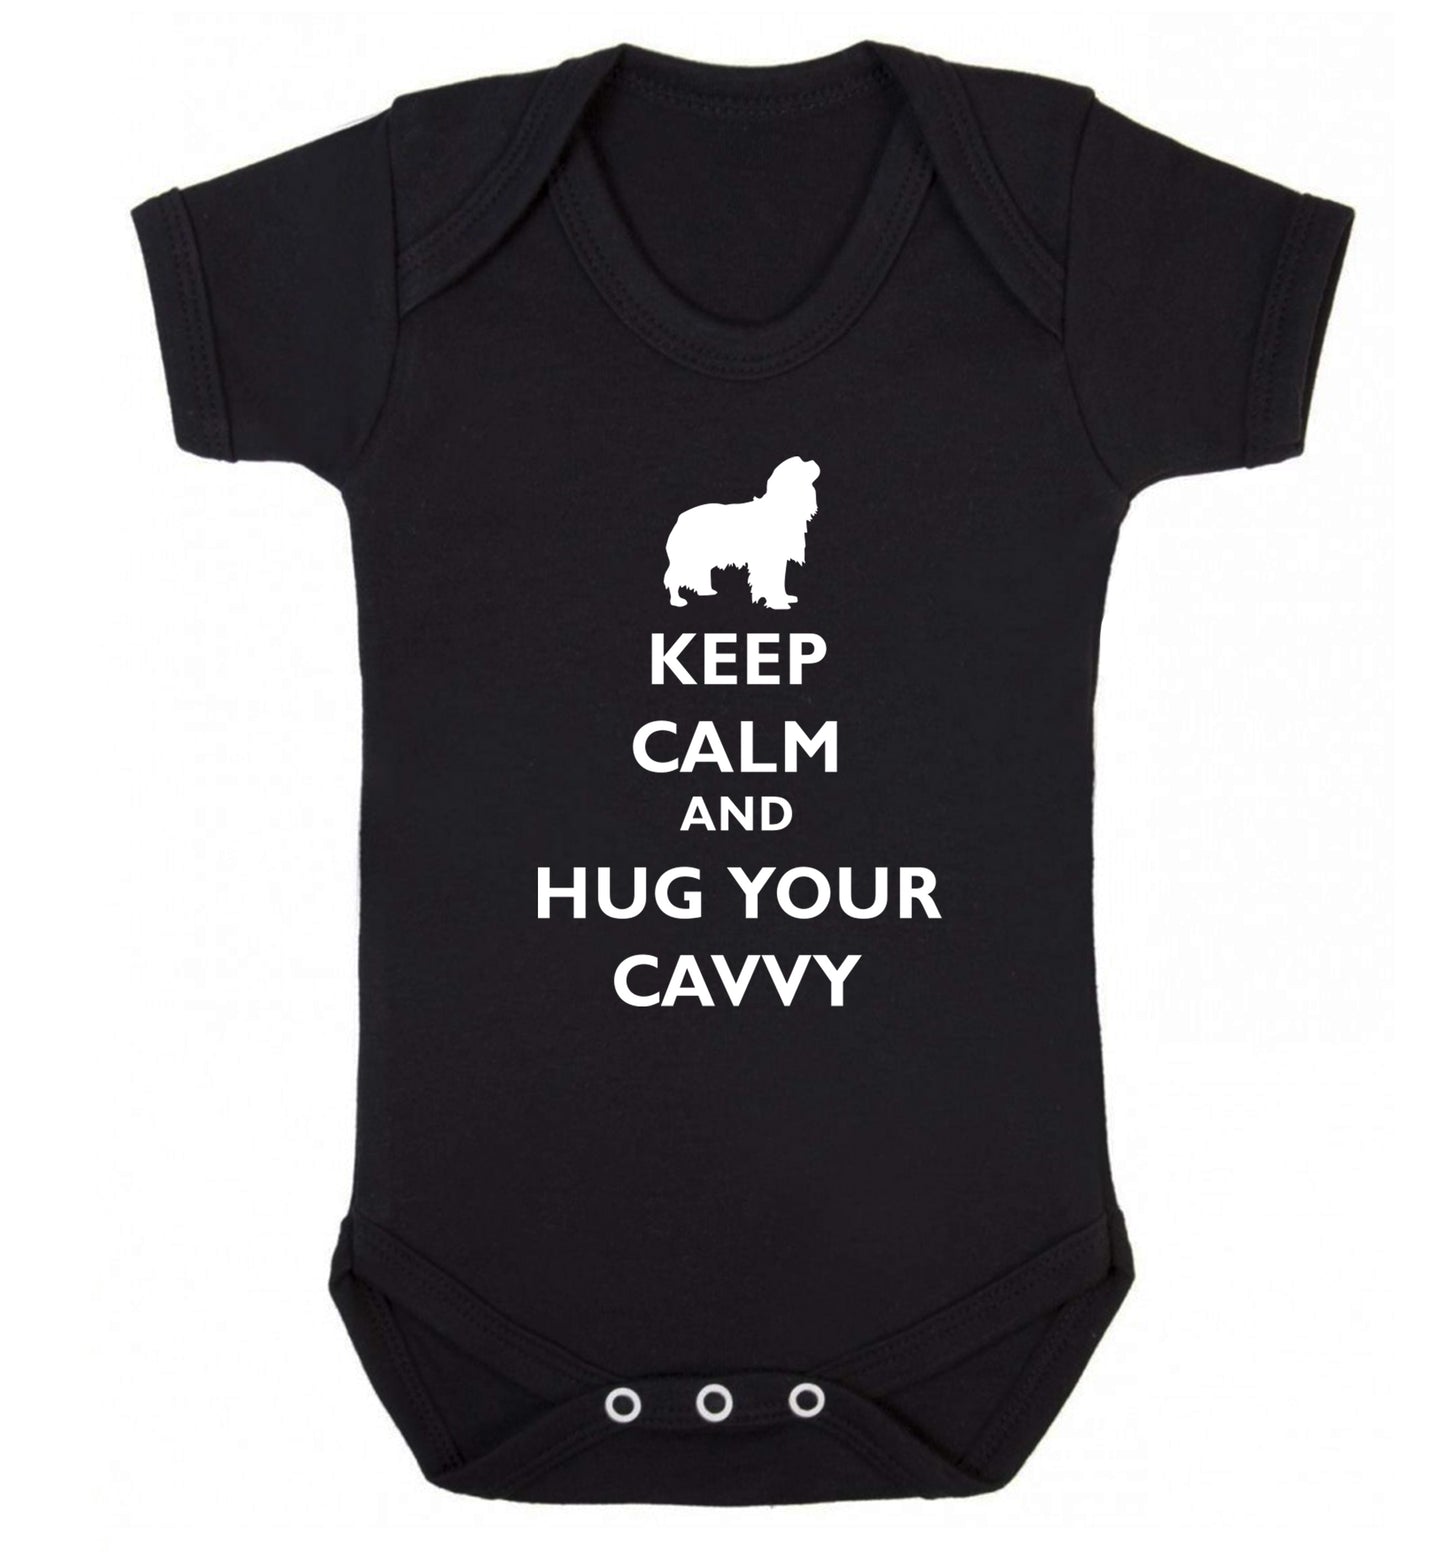 Keep calm and hug your cavvy Baby Vest black 18-24 months